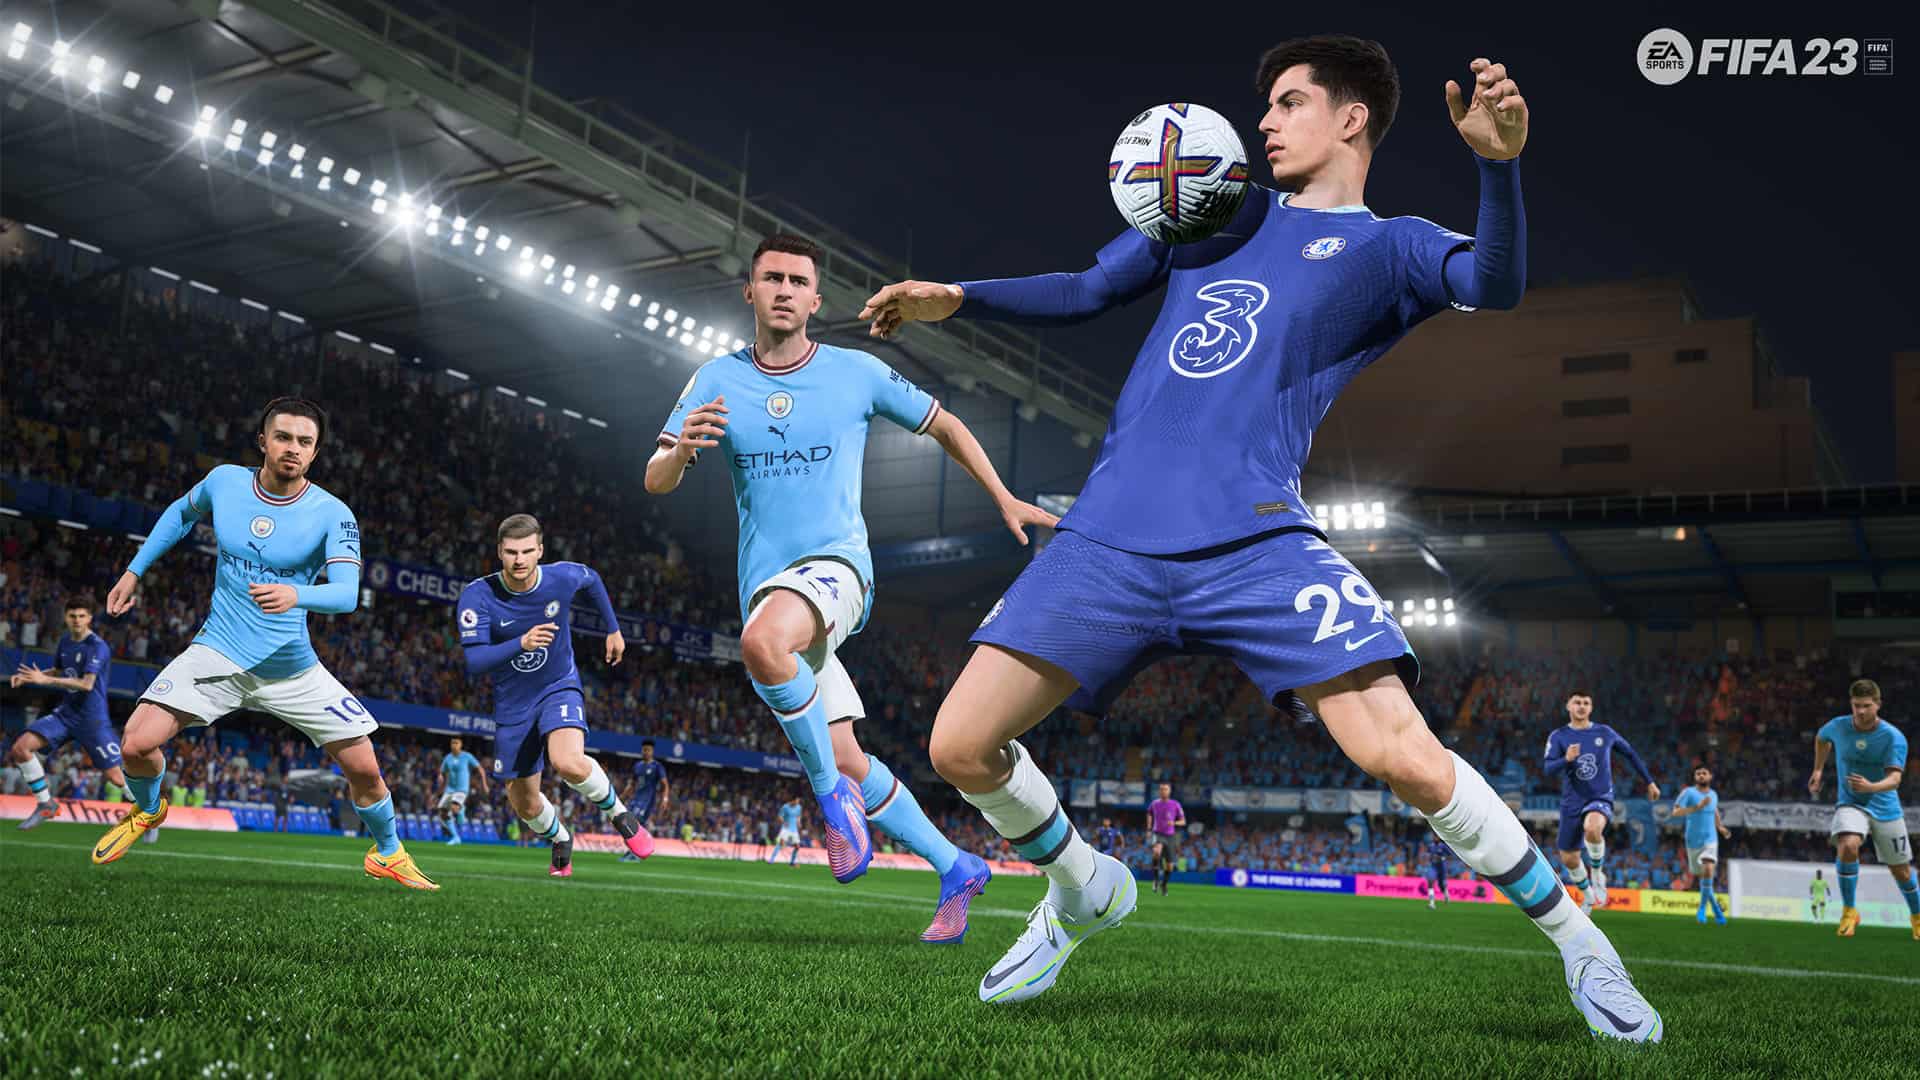 FIFA 23 offers closer look at new gameplay features in latest trailer